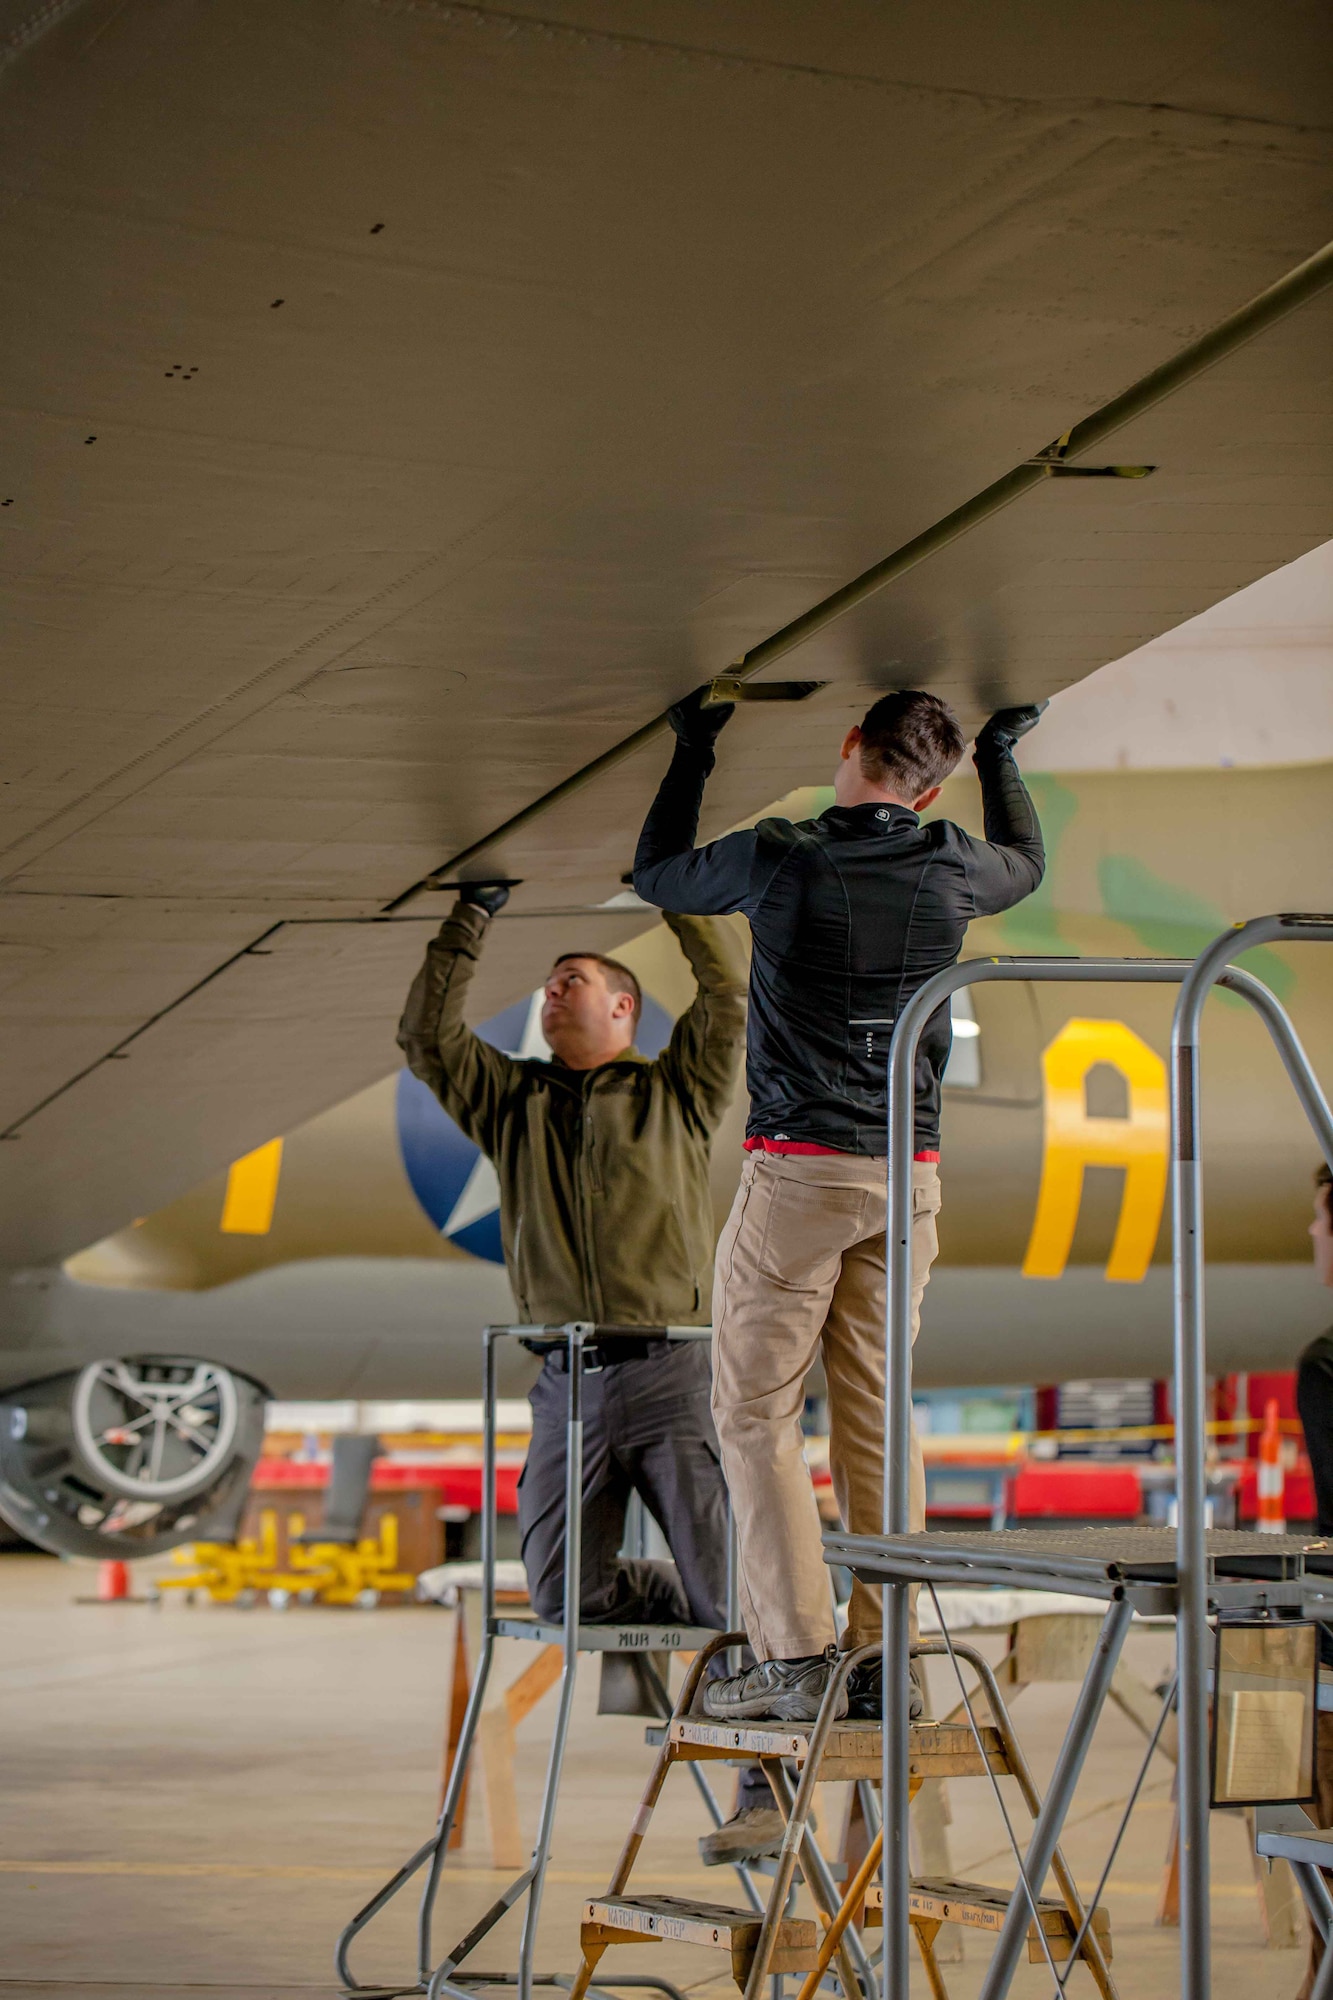 DAYTON, Ohio (01/04/2018) -- National Museum of the U.S. Air Force restoration crews installing the final control surfaces on the Boeing B-17F Memphis Belle™. Plans call for the aircraft to be placed on permanent public display in the WWII Gallery here at the National Museum of the U.S. Air Force on May 17, 2018. (U.S. Air Force photo by Ernie Muller)